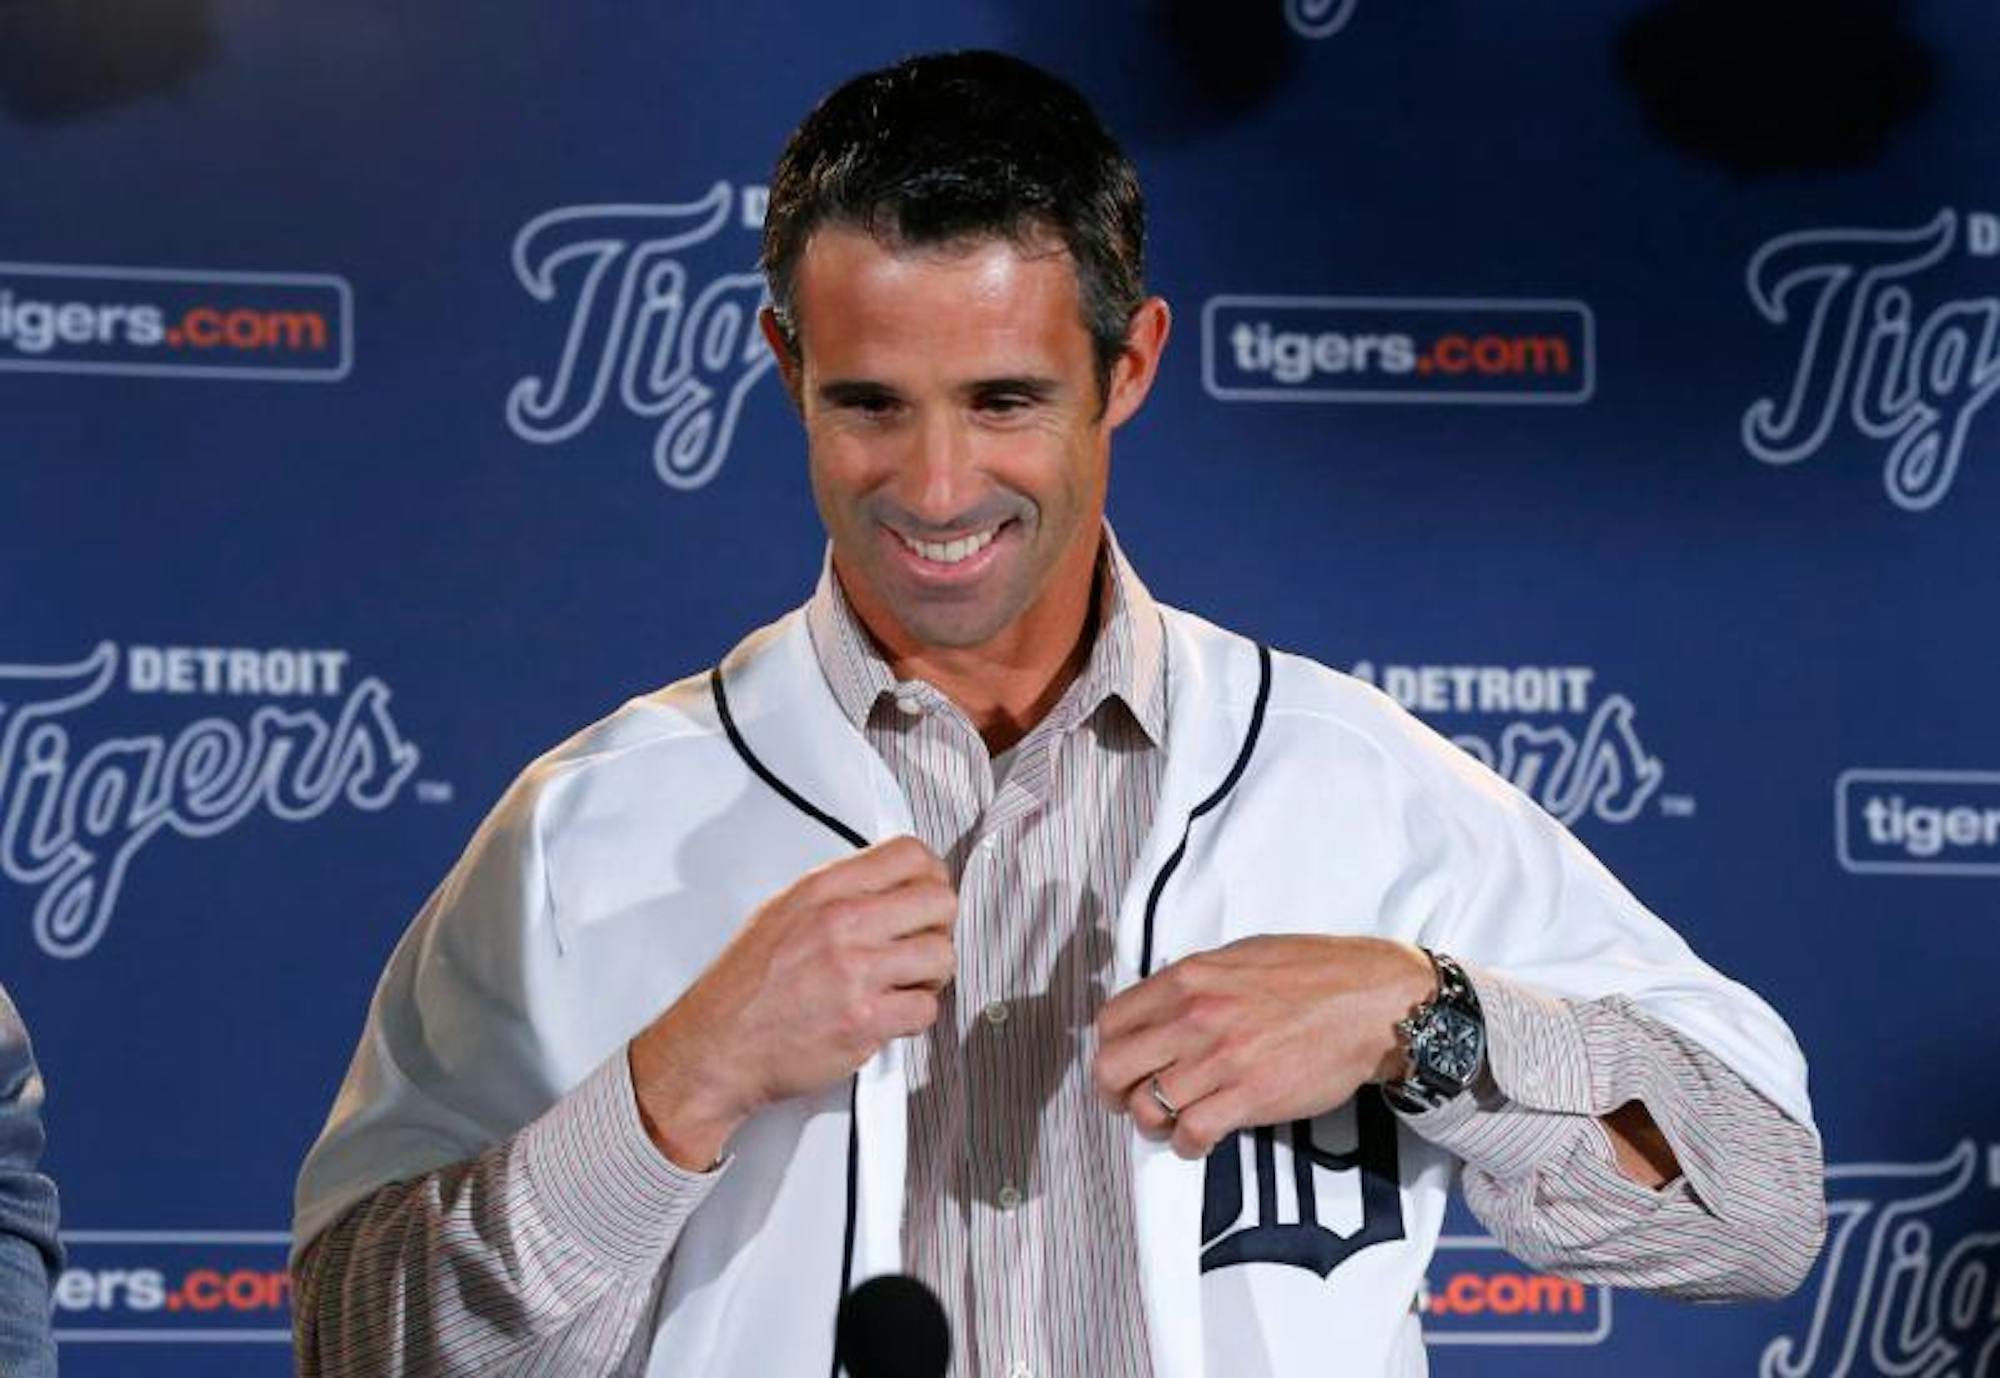 Ausmus will manage his first regular season game on March 31 versus the Royals.